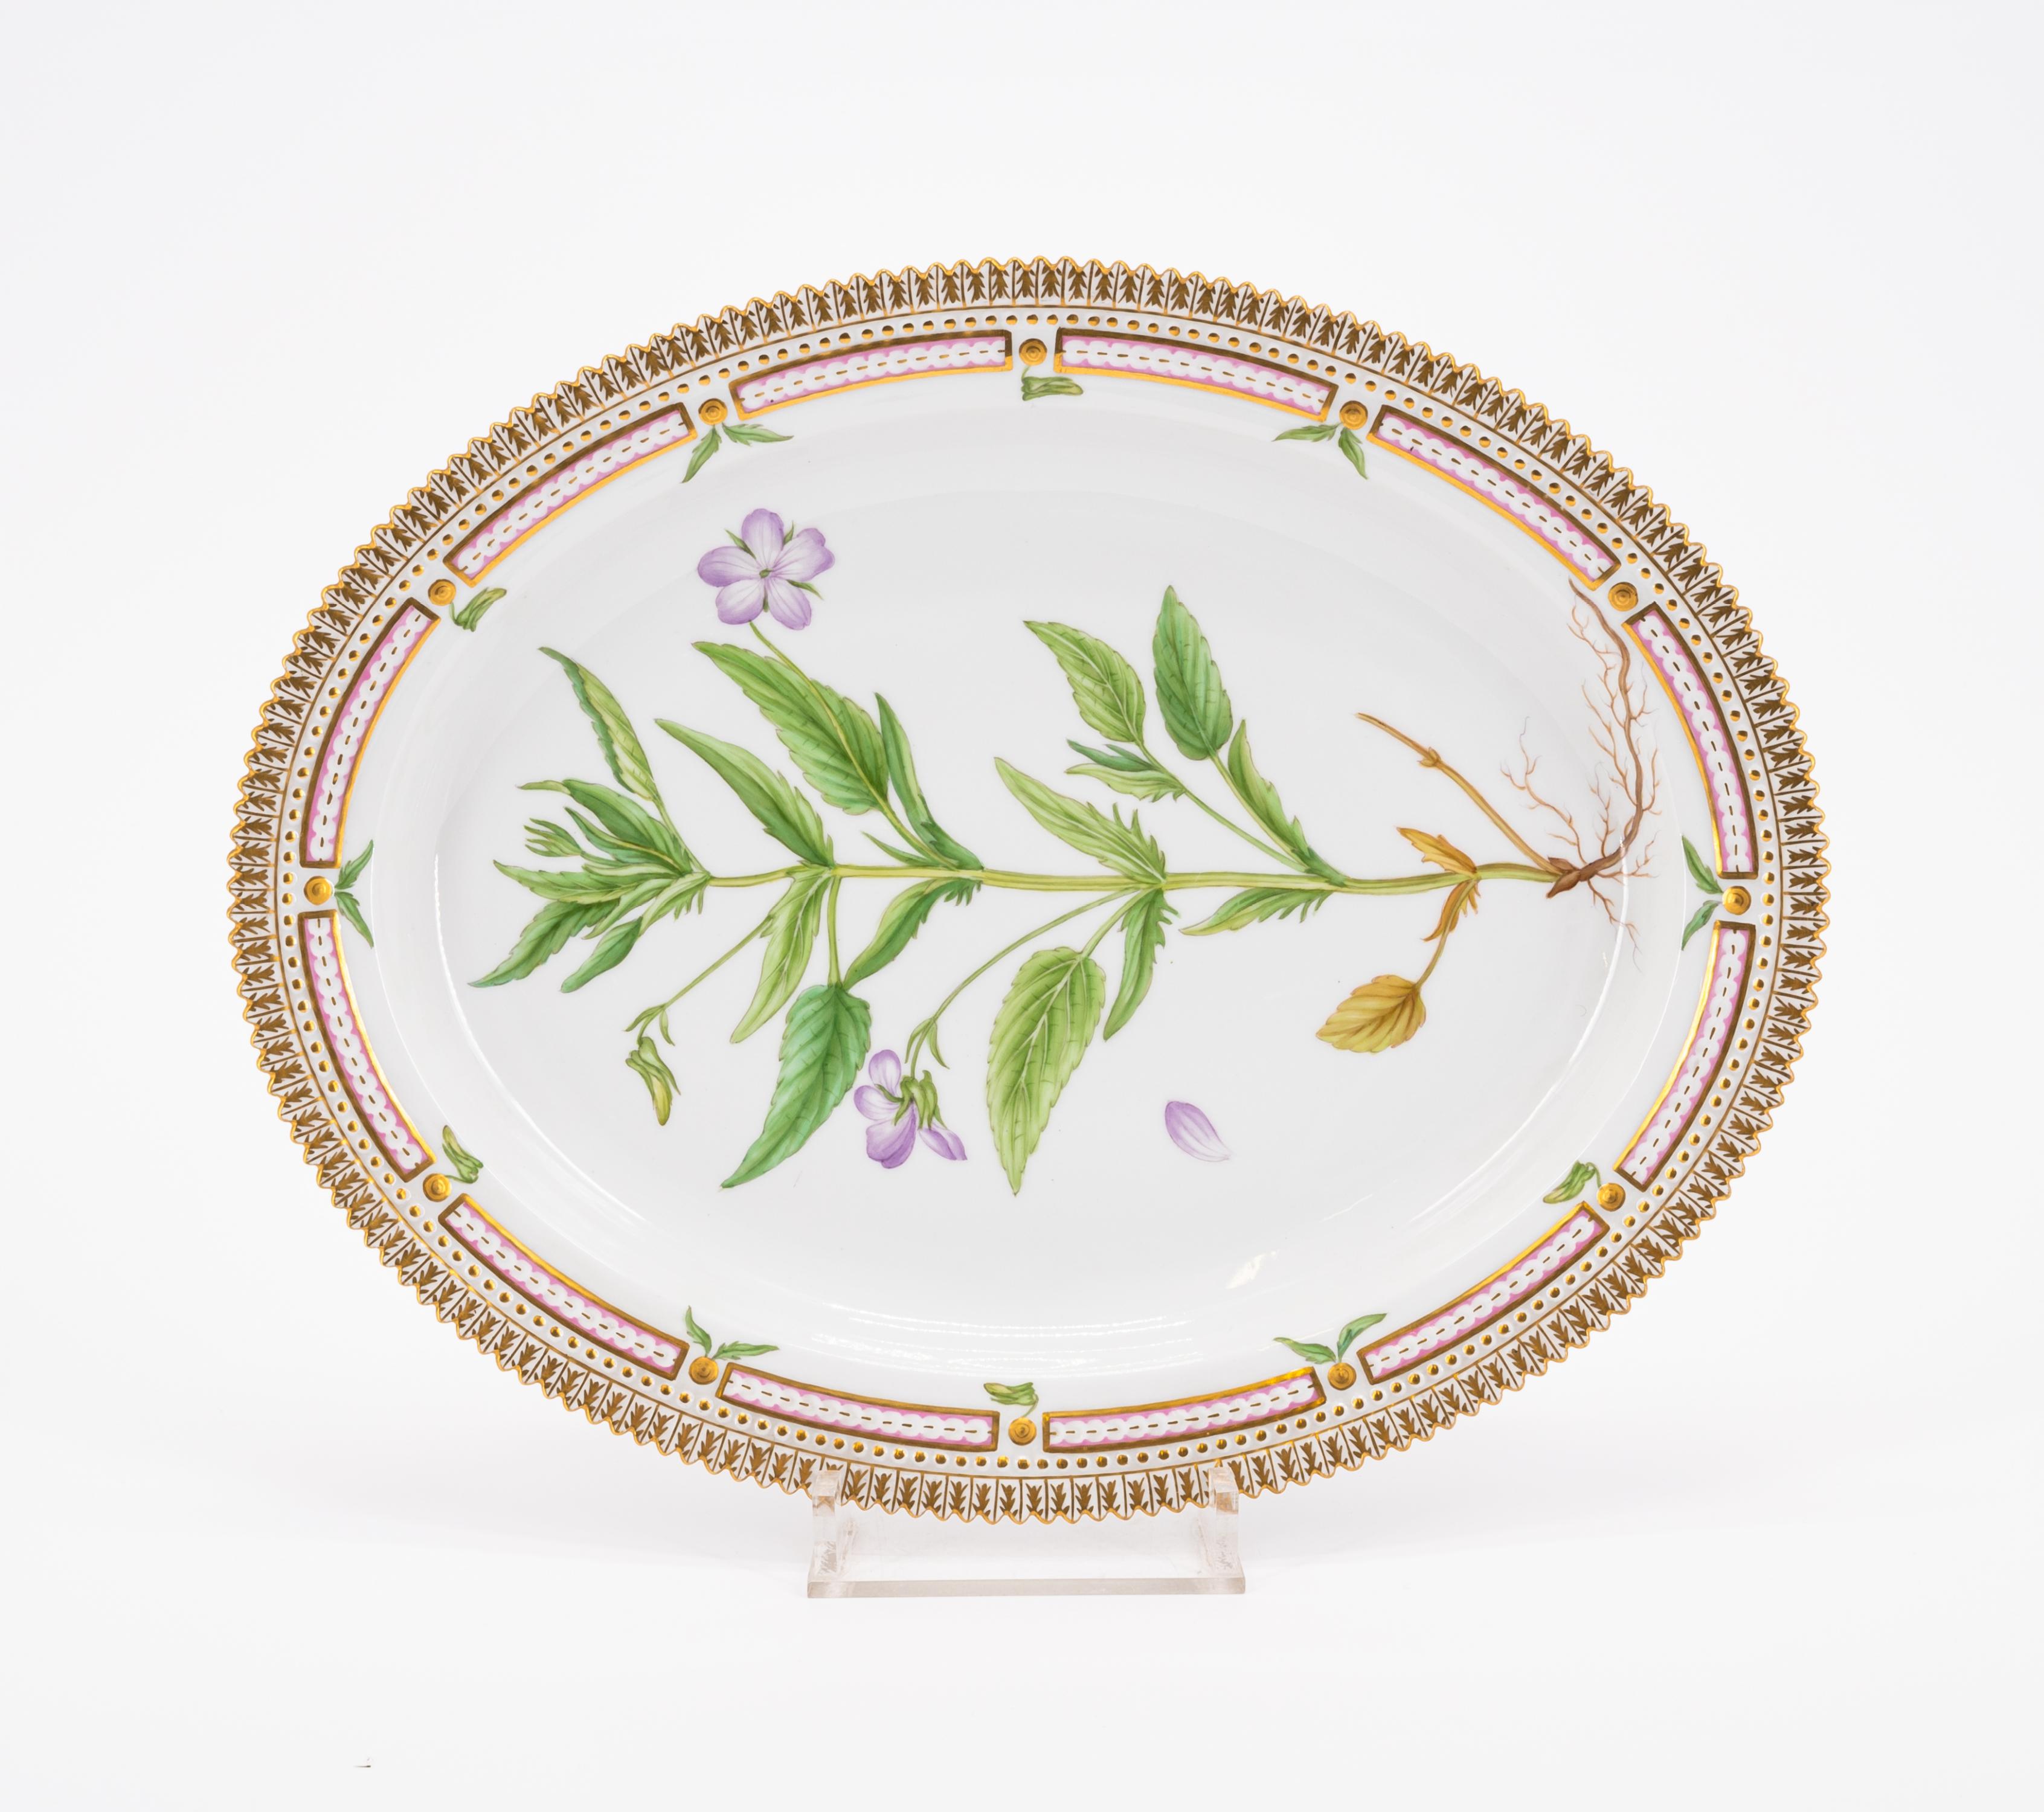 18 PIECES FROM A PORCELAIN DINNER SERVICE 'FLORA DANICA' - Image 7 of 26